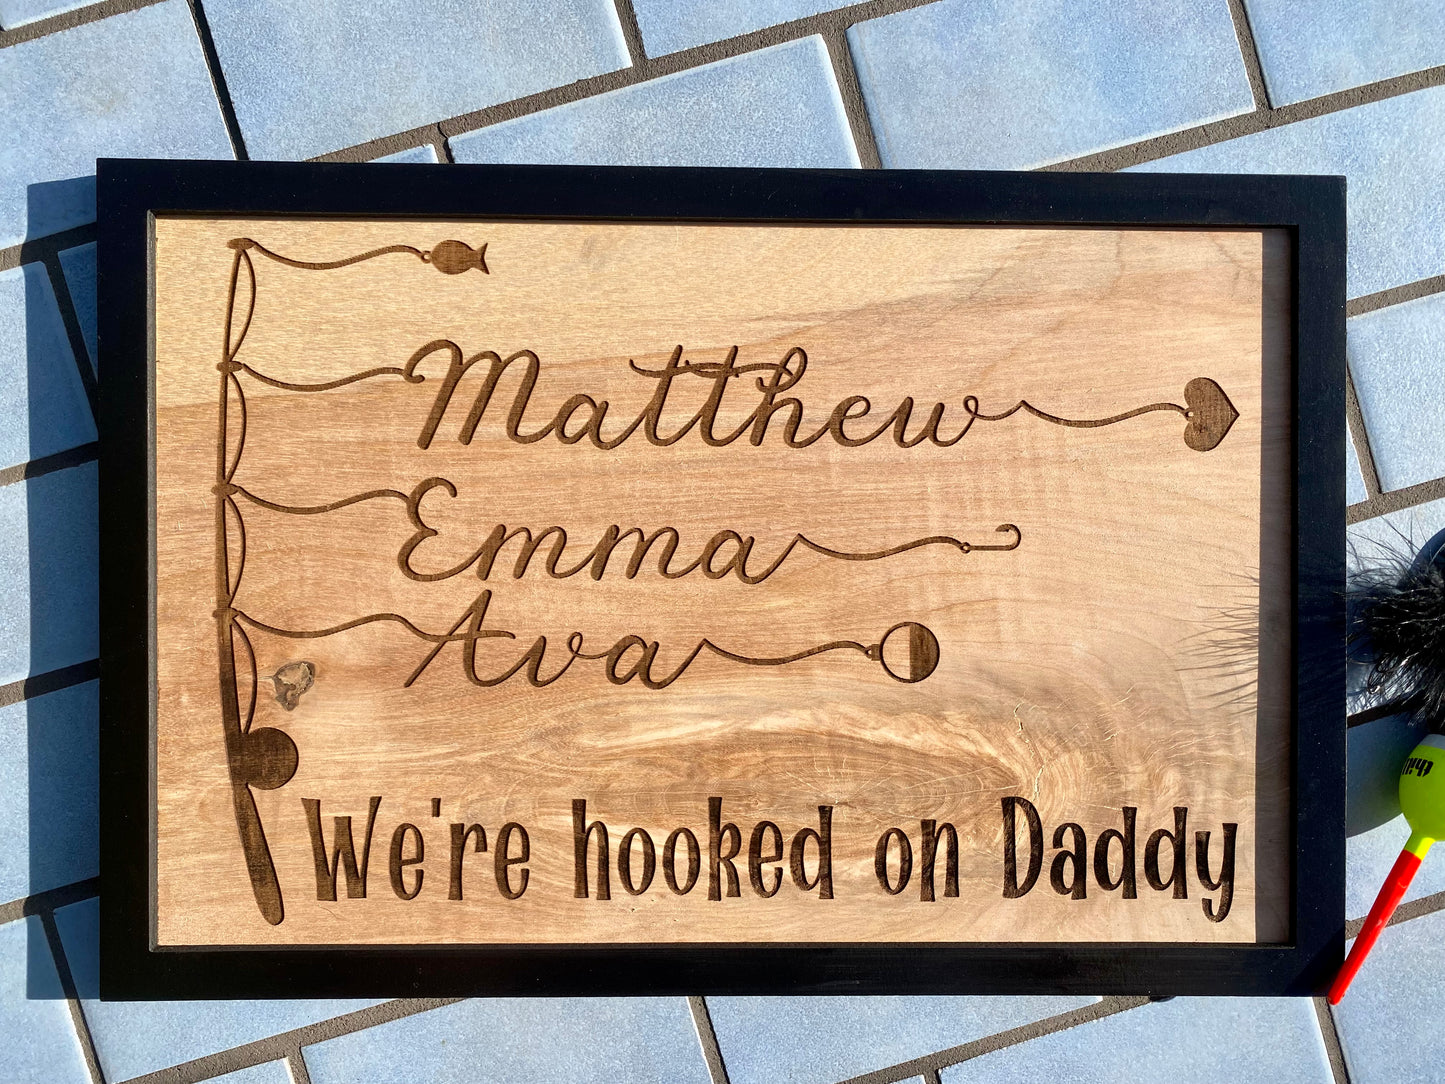 We’re Hooked on Daddy - Father’s Day Gift - Birthday Gift - Dad Gift - Engraved Wood Sign - Custom Decor